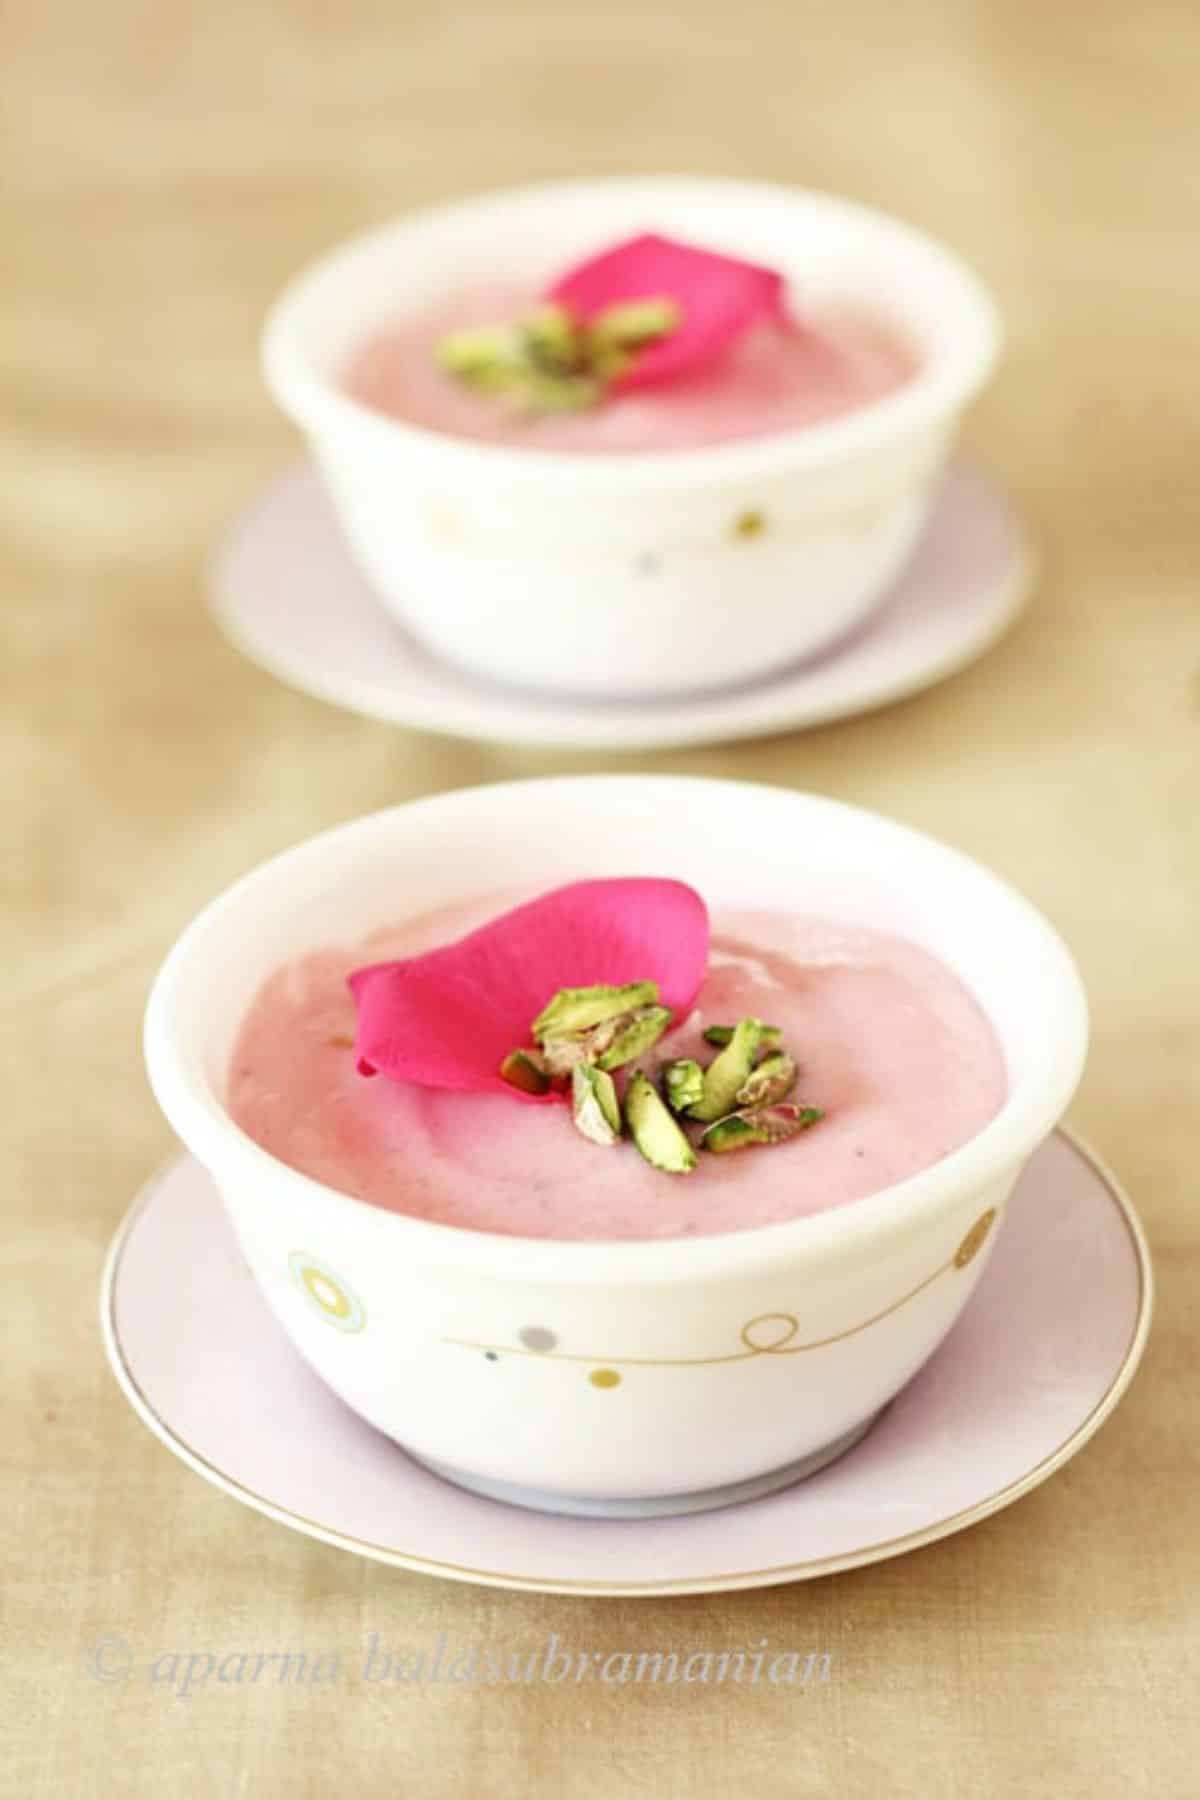 Delicious rose pudding in small bowls.